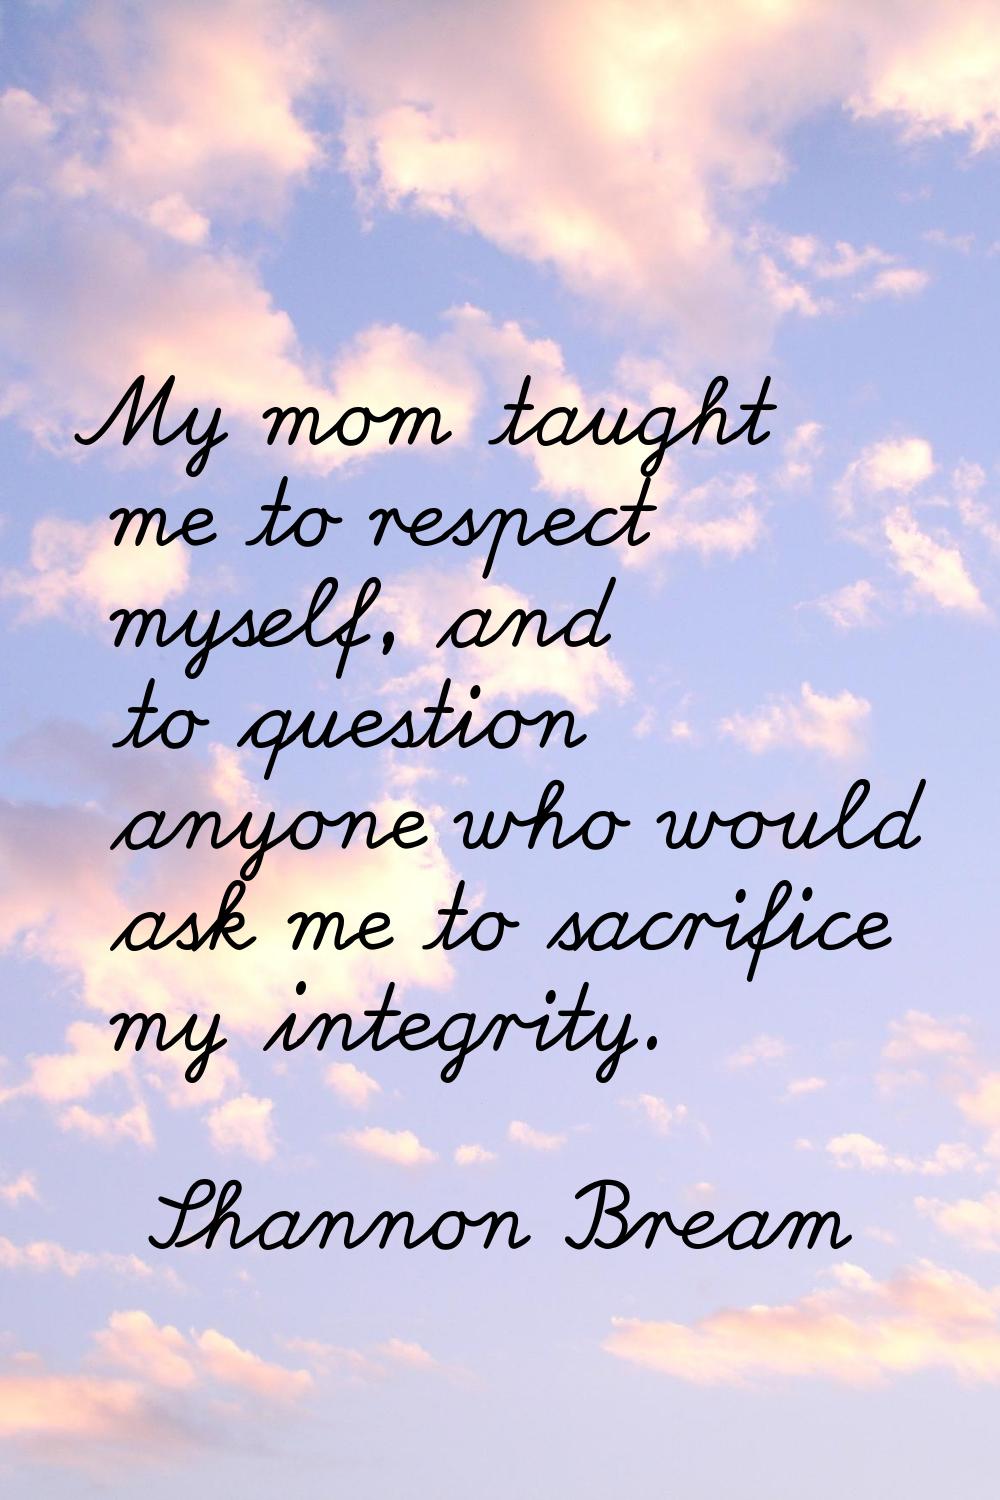 My mom taught me to respect myself, and to question anyone who would ask me to sacrifice my integri